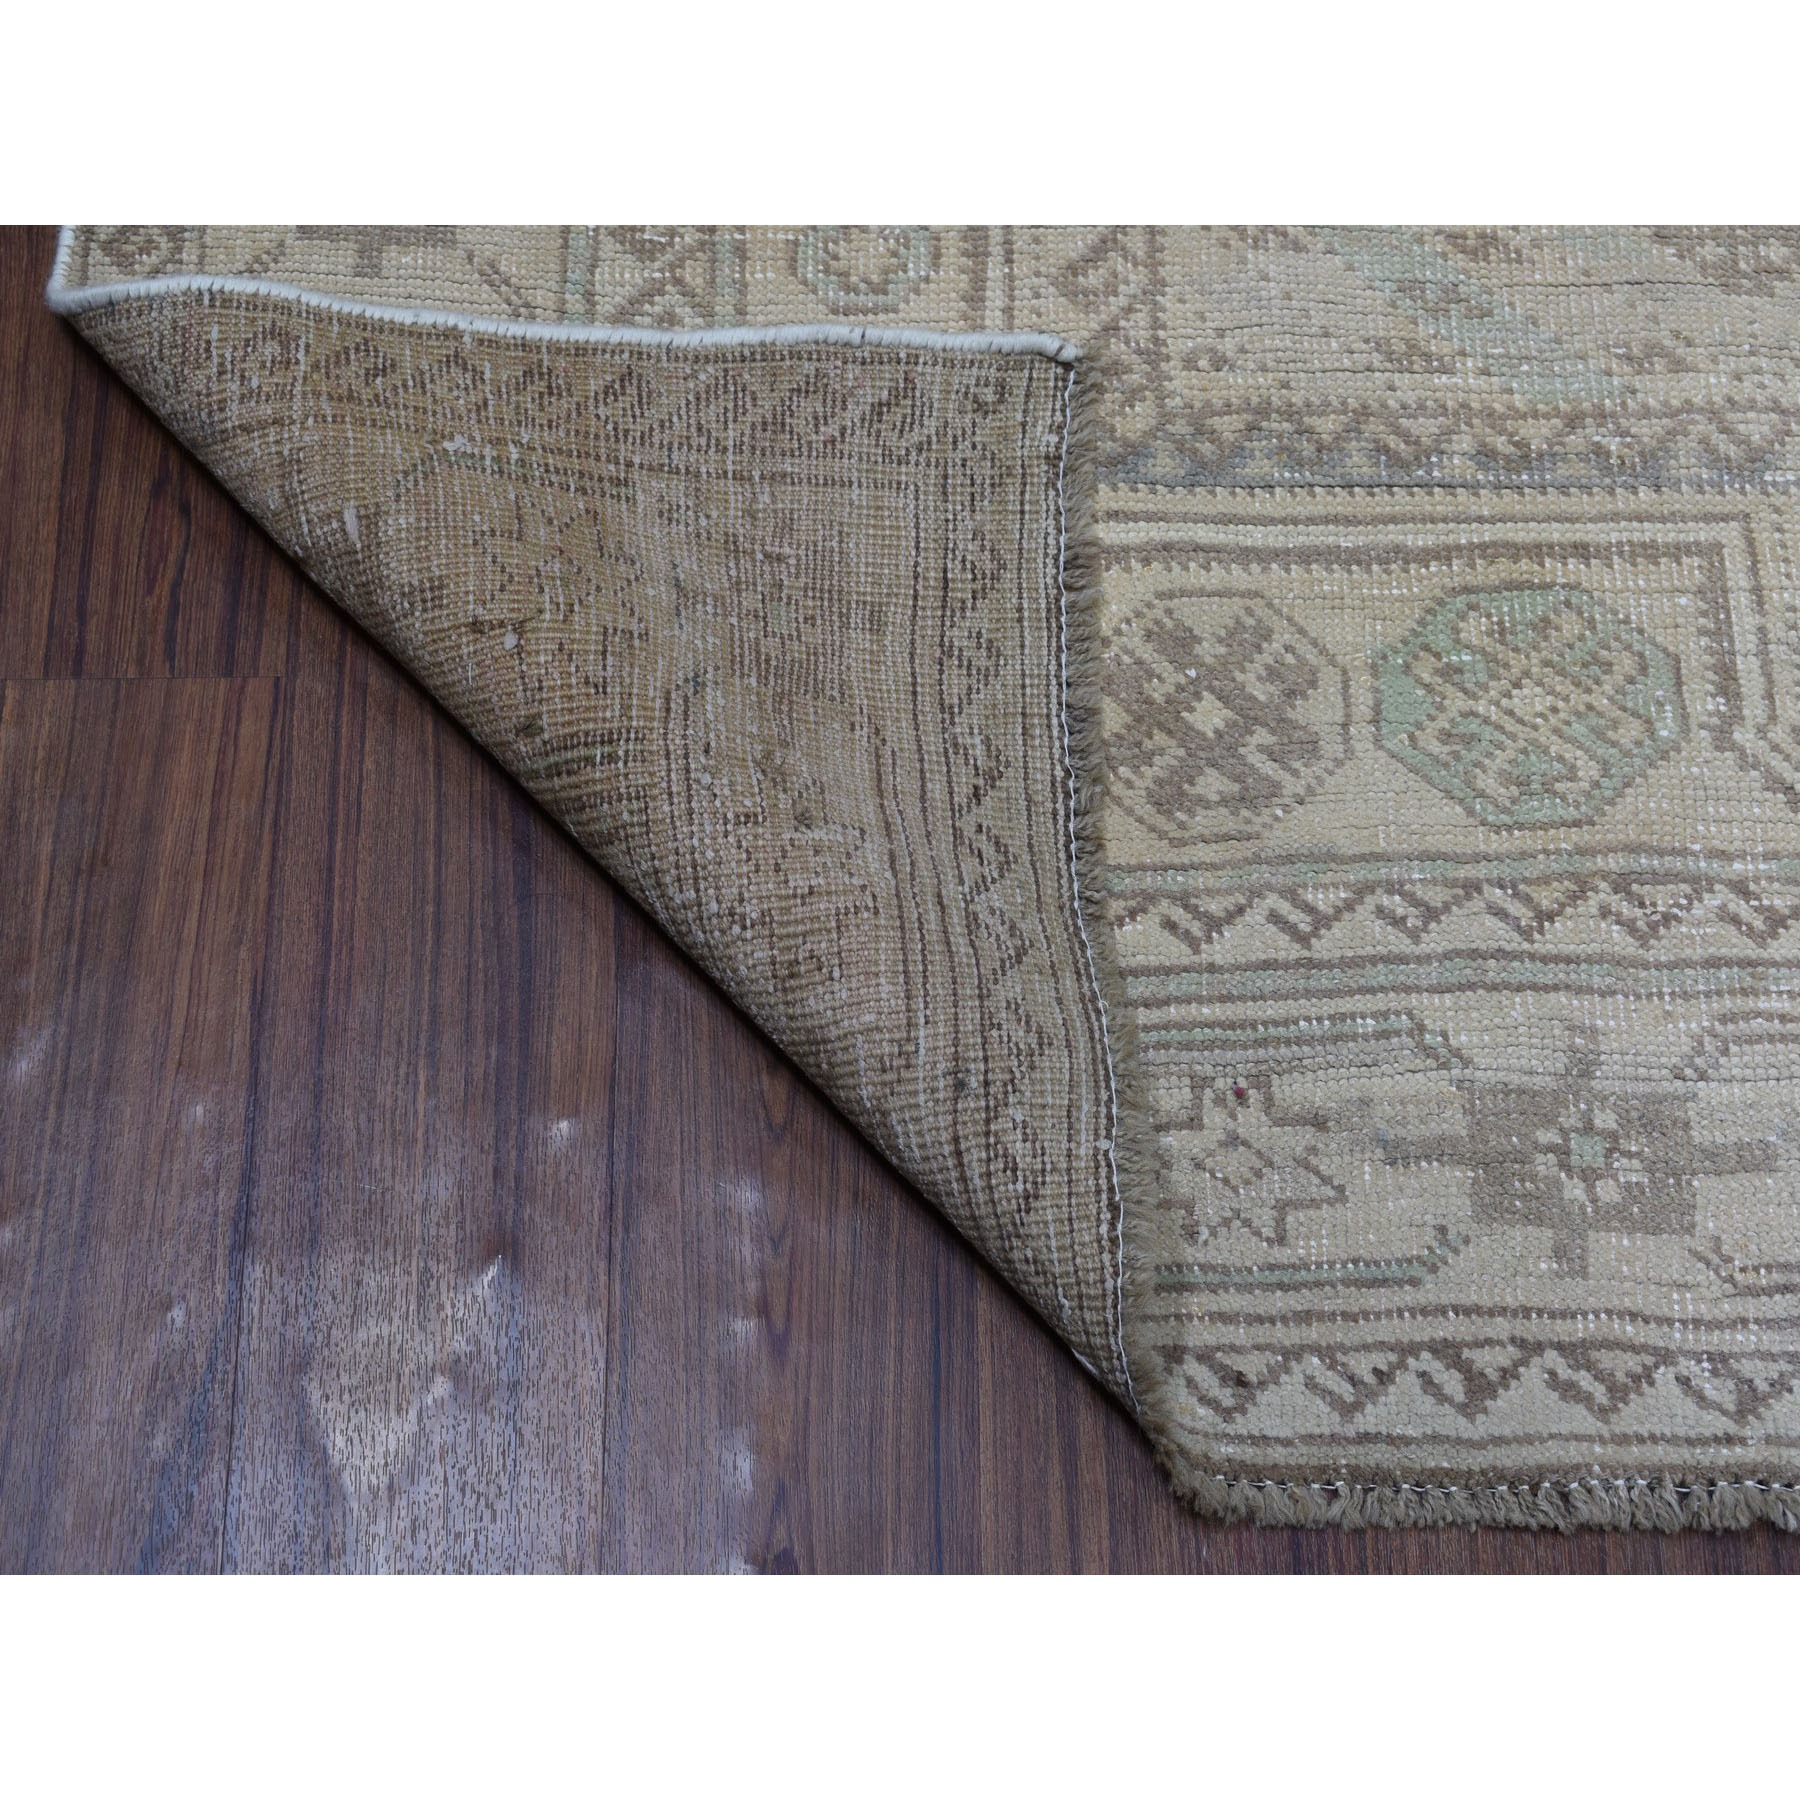 5-2 x9-1   Vintage And Worn Down Distressed Colors Persian Qashqai Hand Knotted Bohemian Rug 